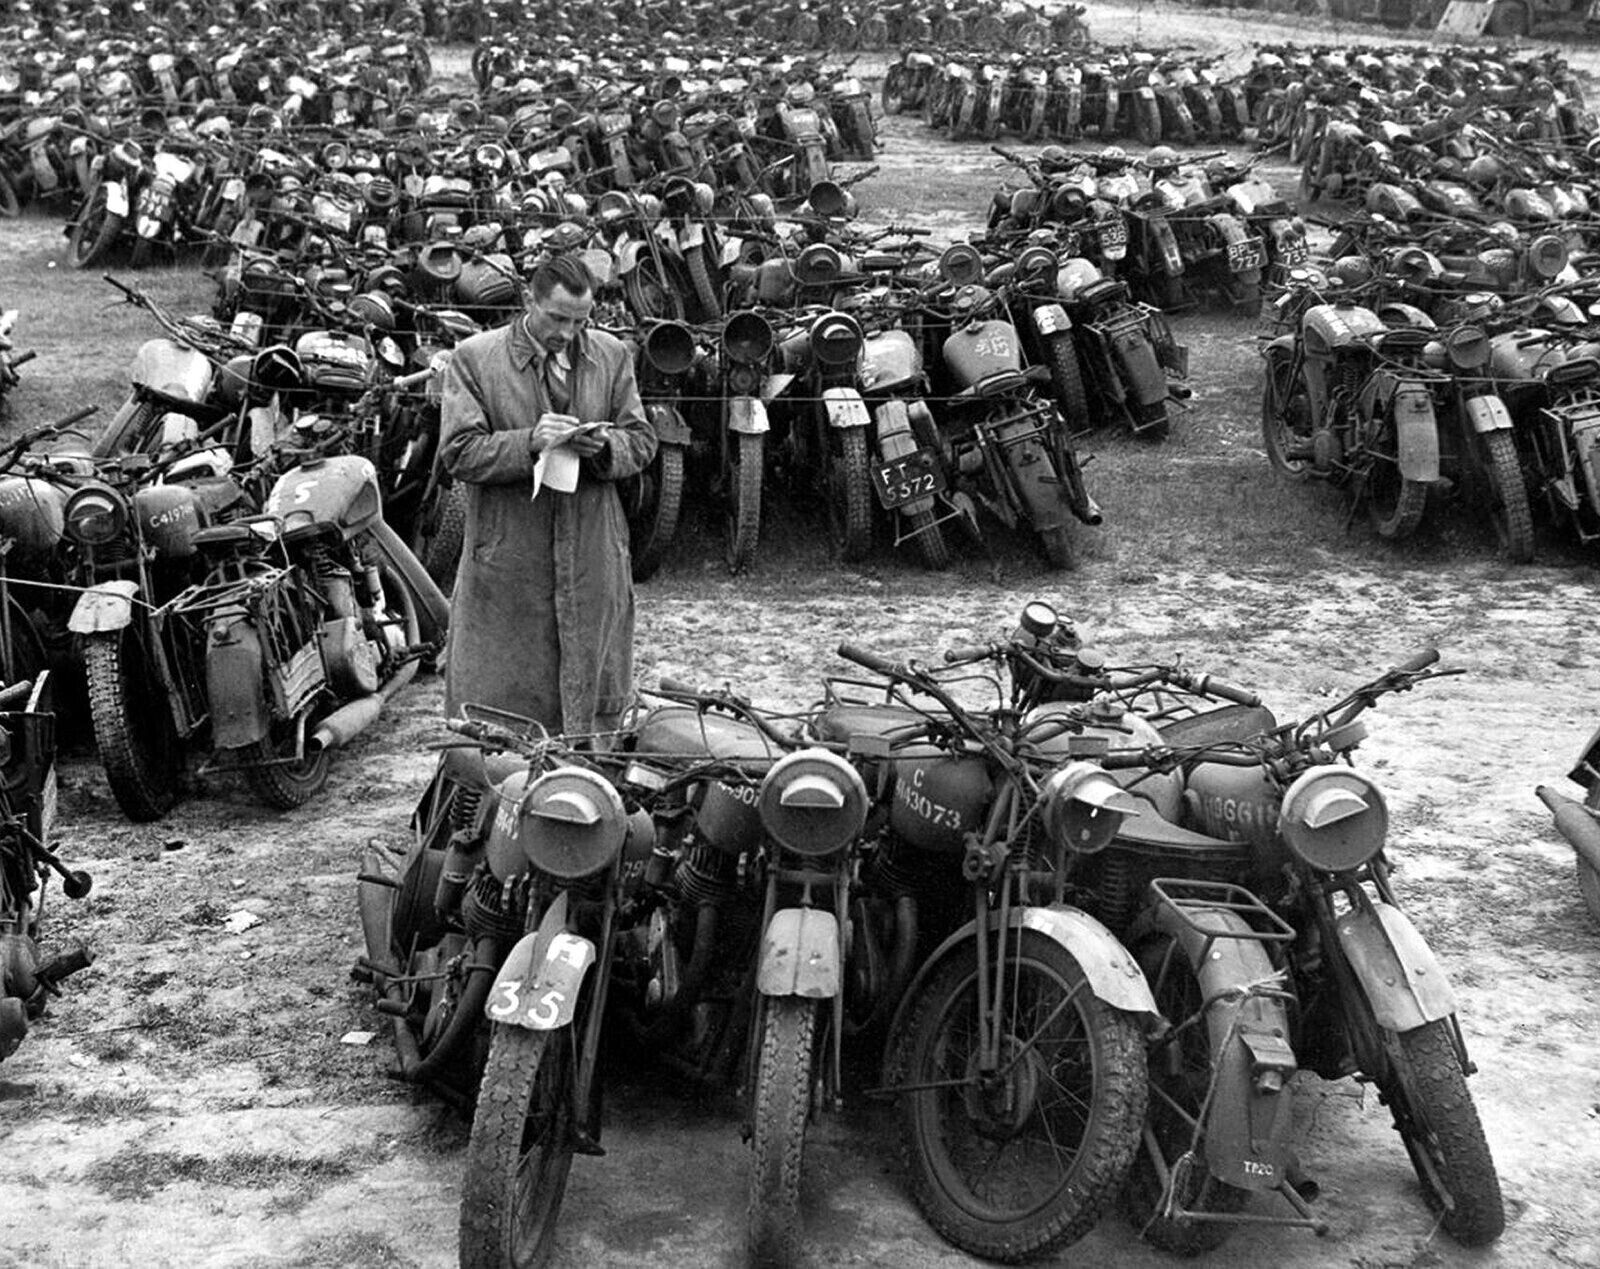 1946 Auction of WW2 MILITARY MOTORCYCLE World War 2 Historic Picture Photo 8x10